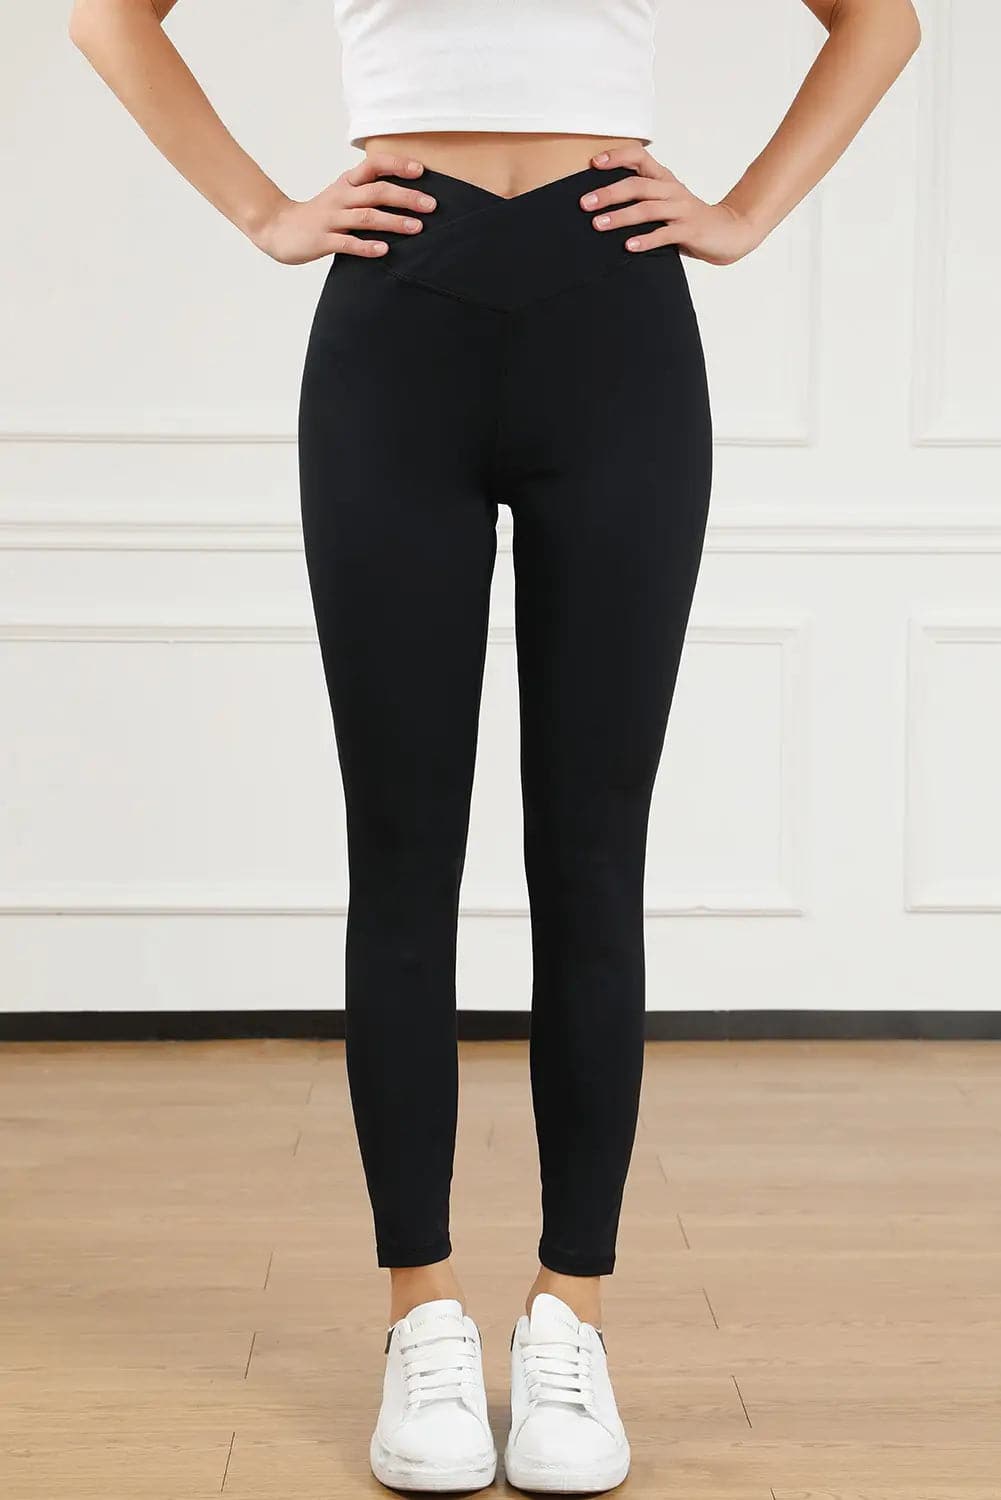 Black Arched Waist Seamless Active Leggings - Activewear